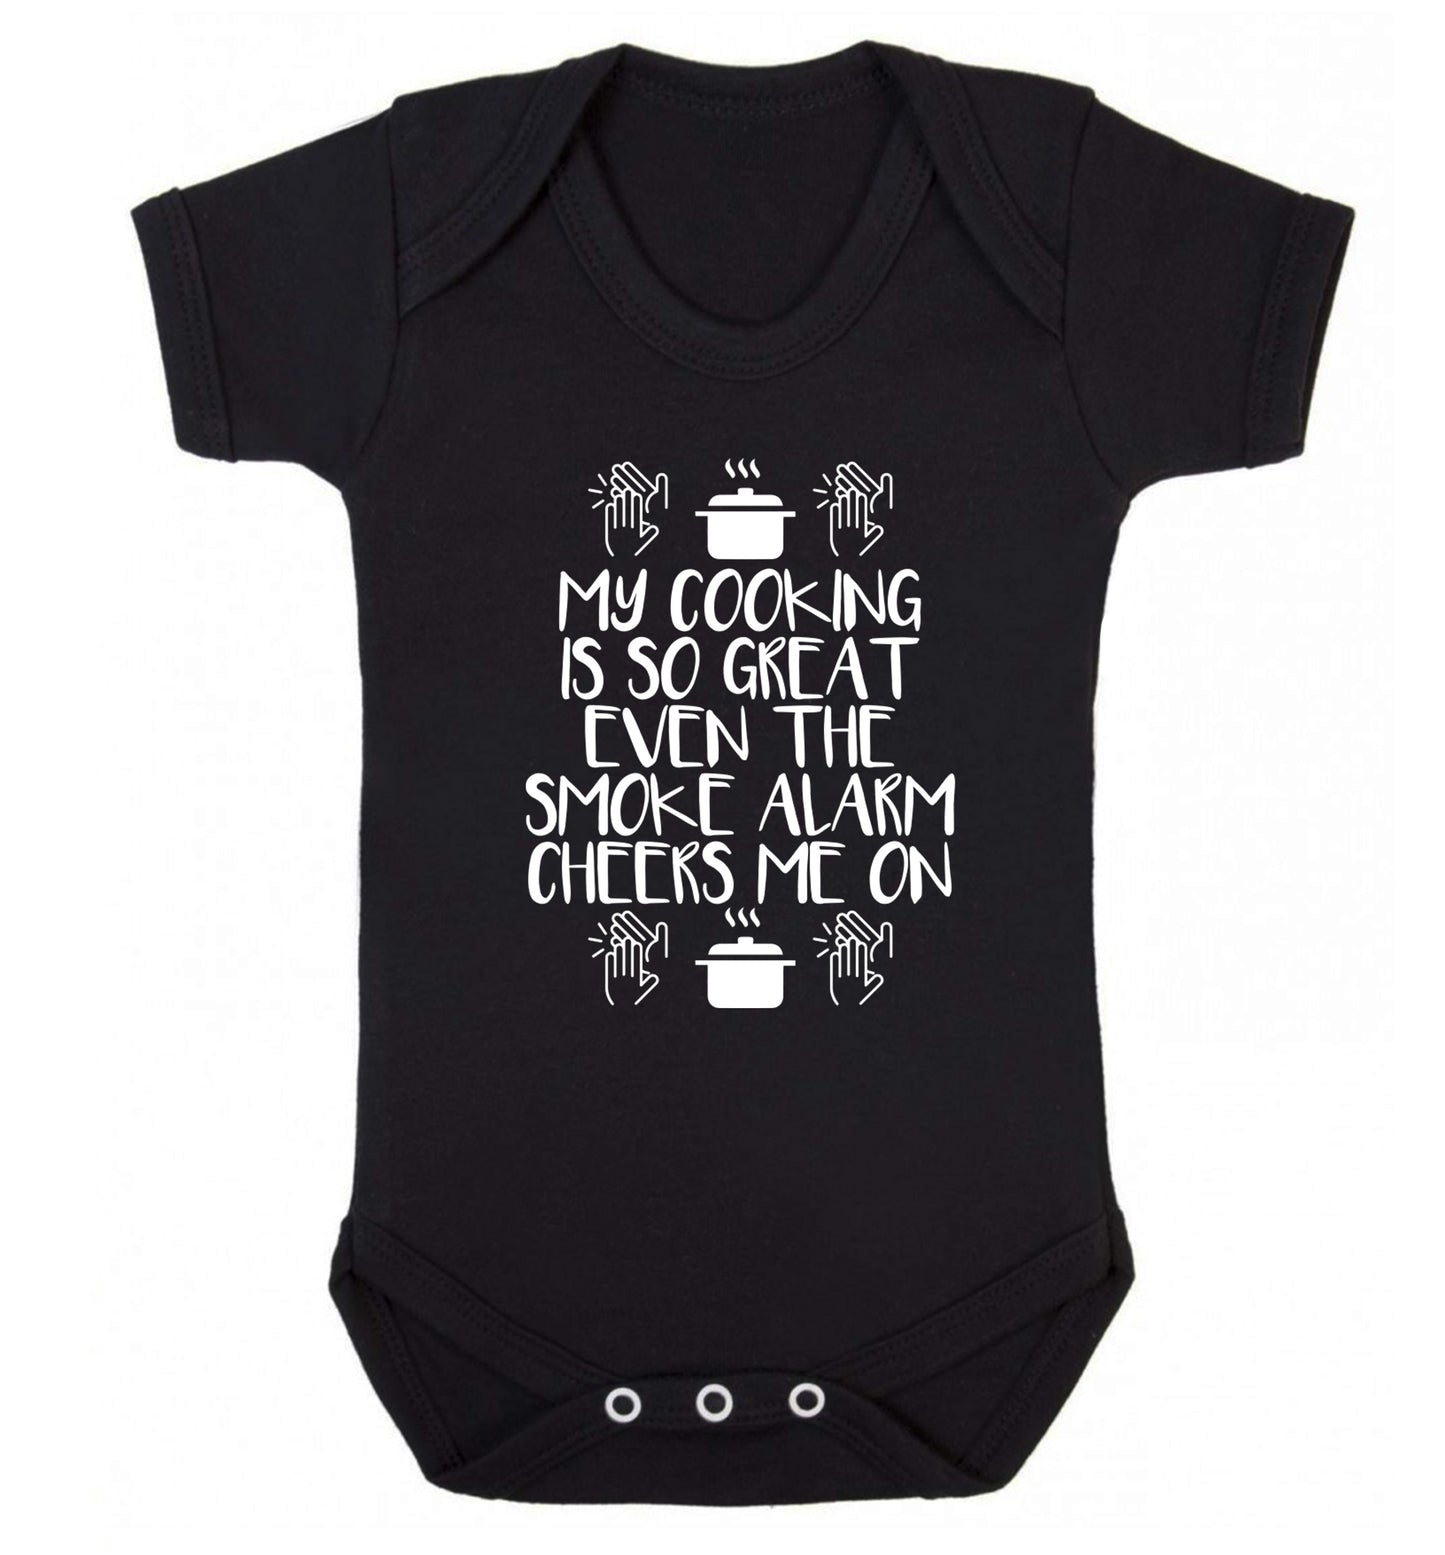 My cooking is so great even the smoke alarm cheers me on! Baby Vest black 18-24 months